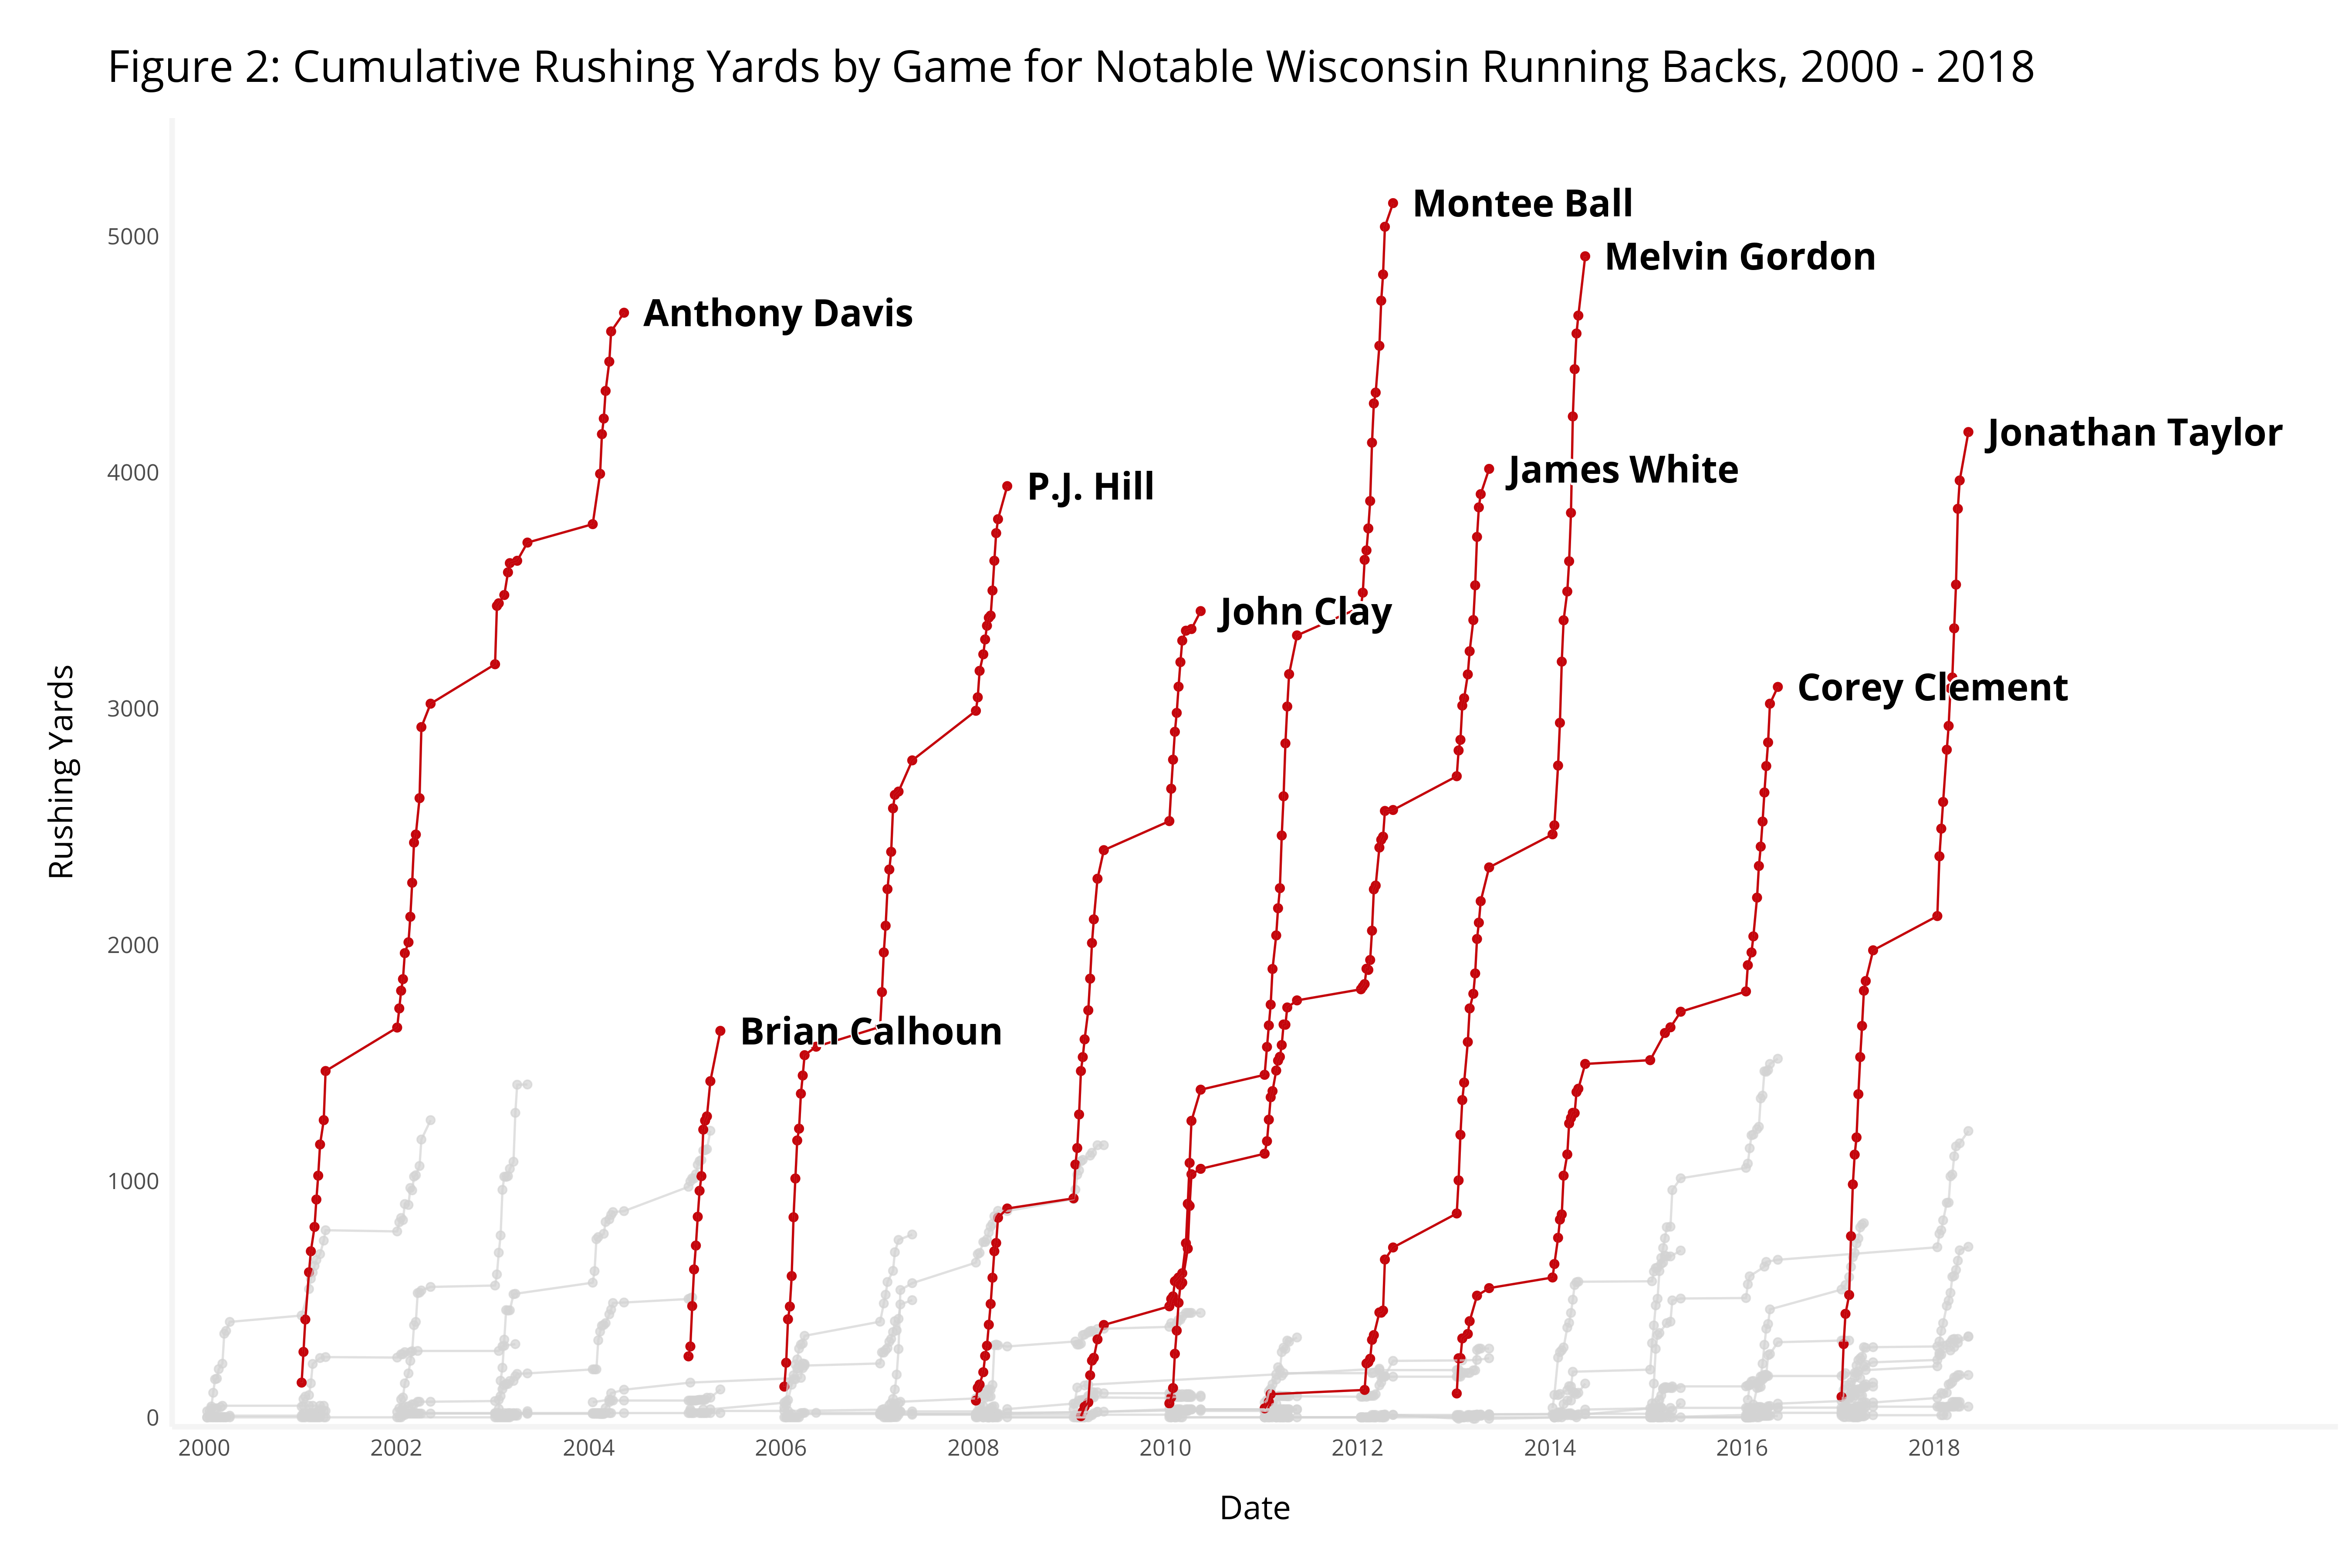 Figure 2: Cumulative Rushing Yards by Game for Notable Wisconsin Running Backs, 2000 - 2018